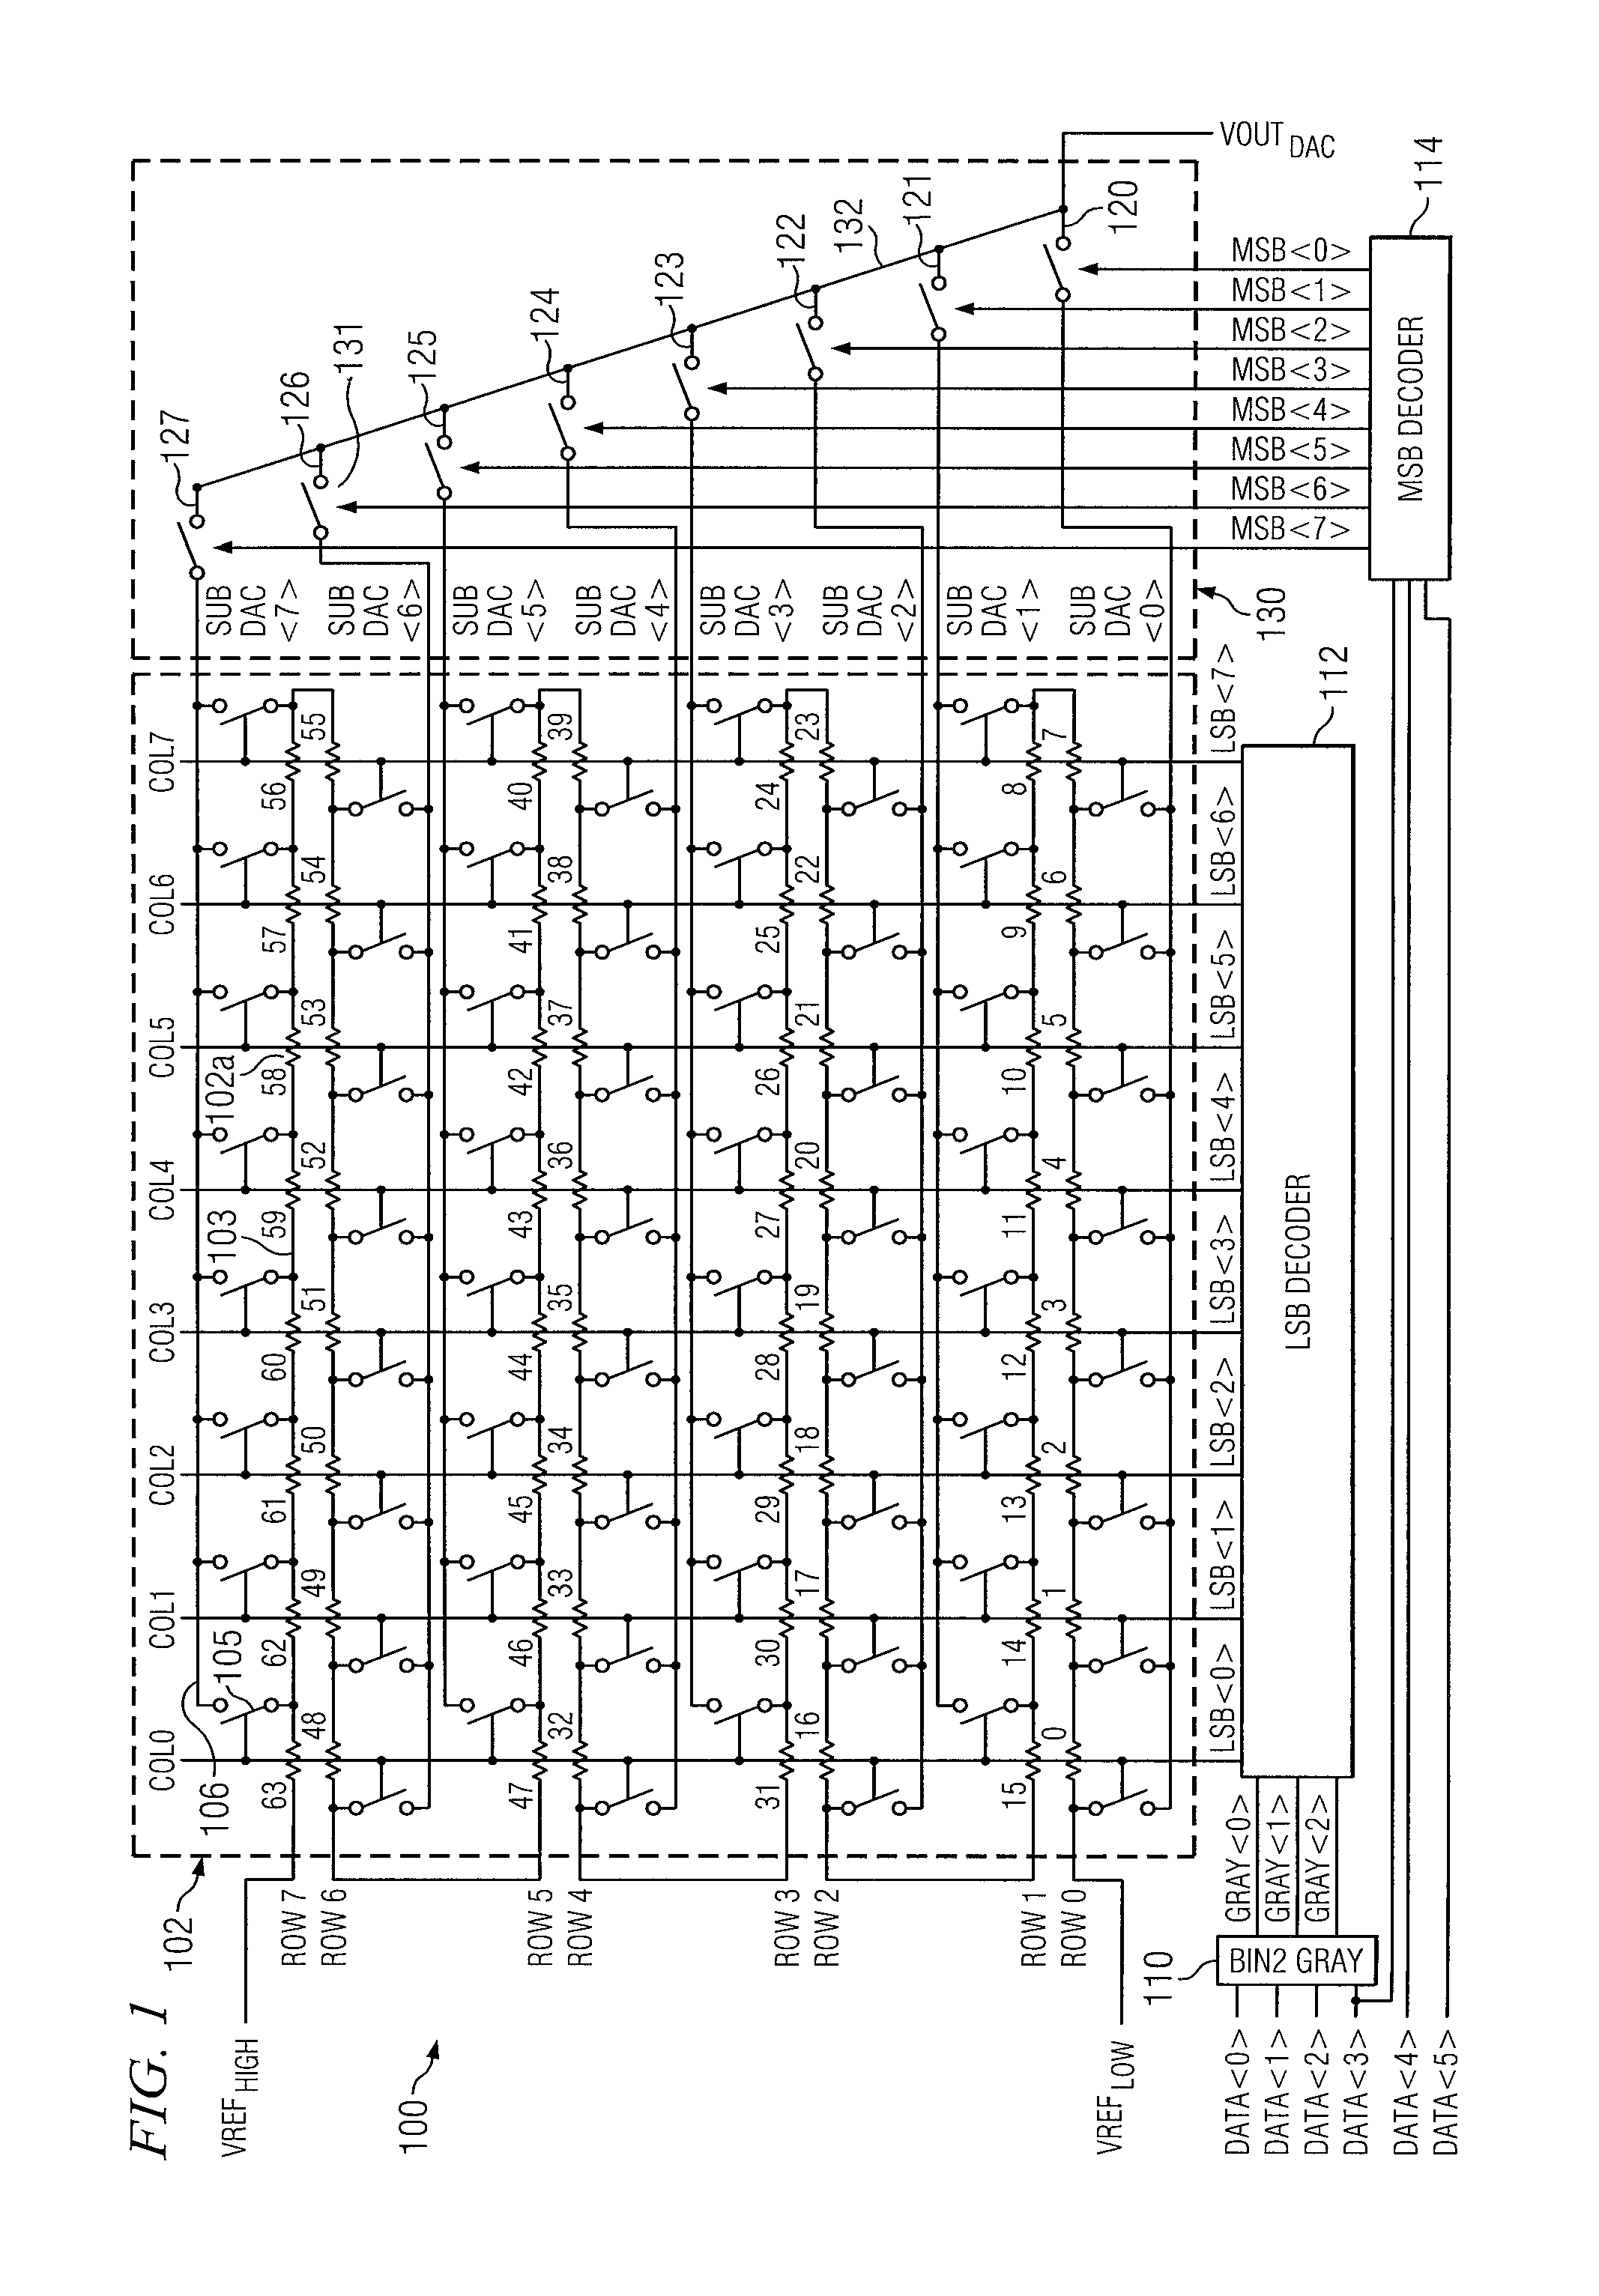 Apparatus and method for simplifying Digital-to-Analog Converter circuitry using gray code